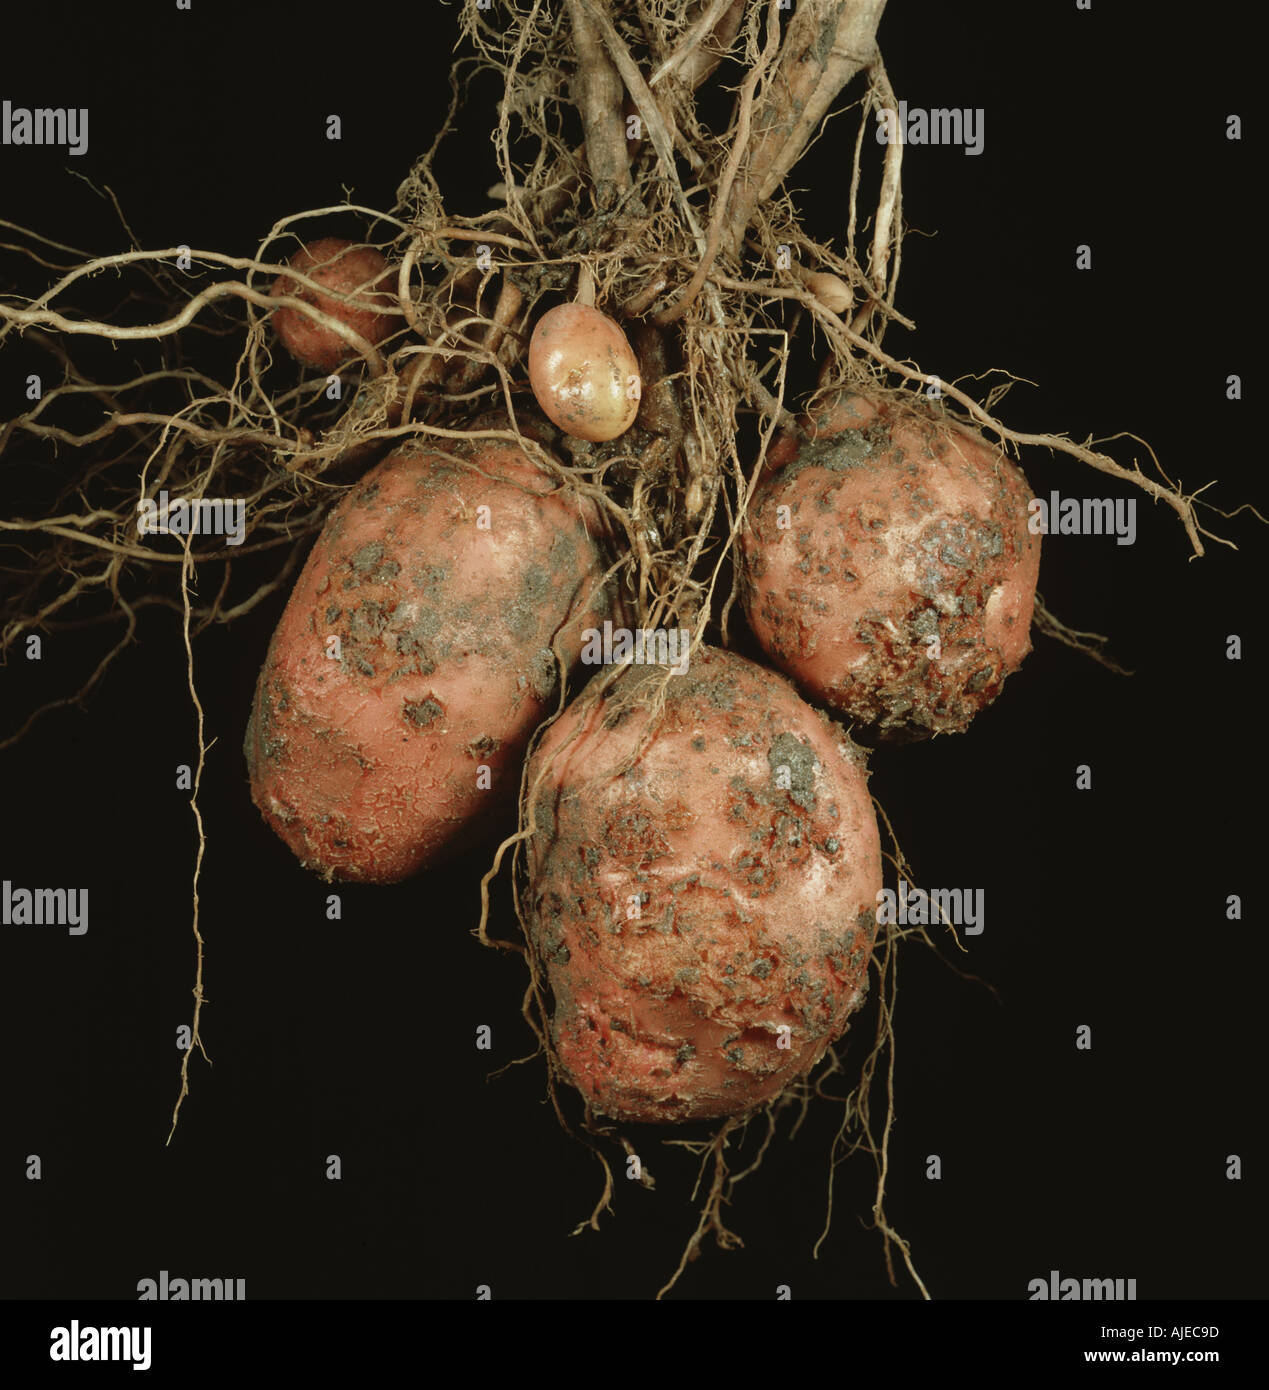 Common scab Streptomyces scabies lesions and pustules on a potato tuber Scab is a common bacterial disease on potatoes Stock Photo